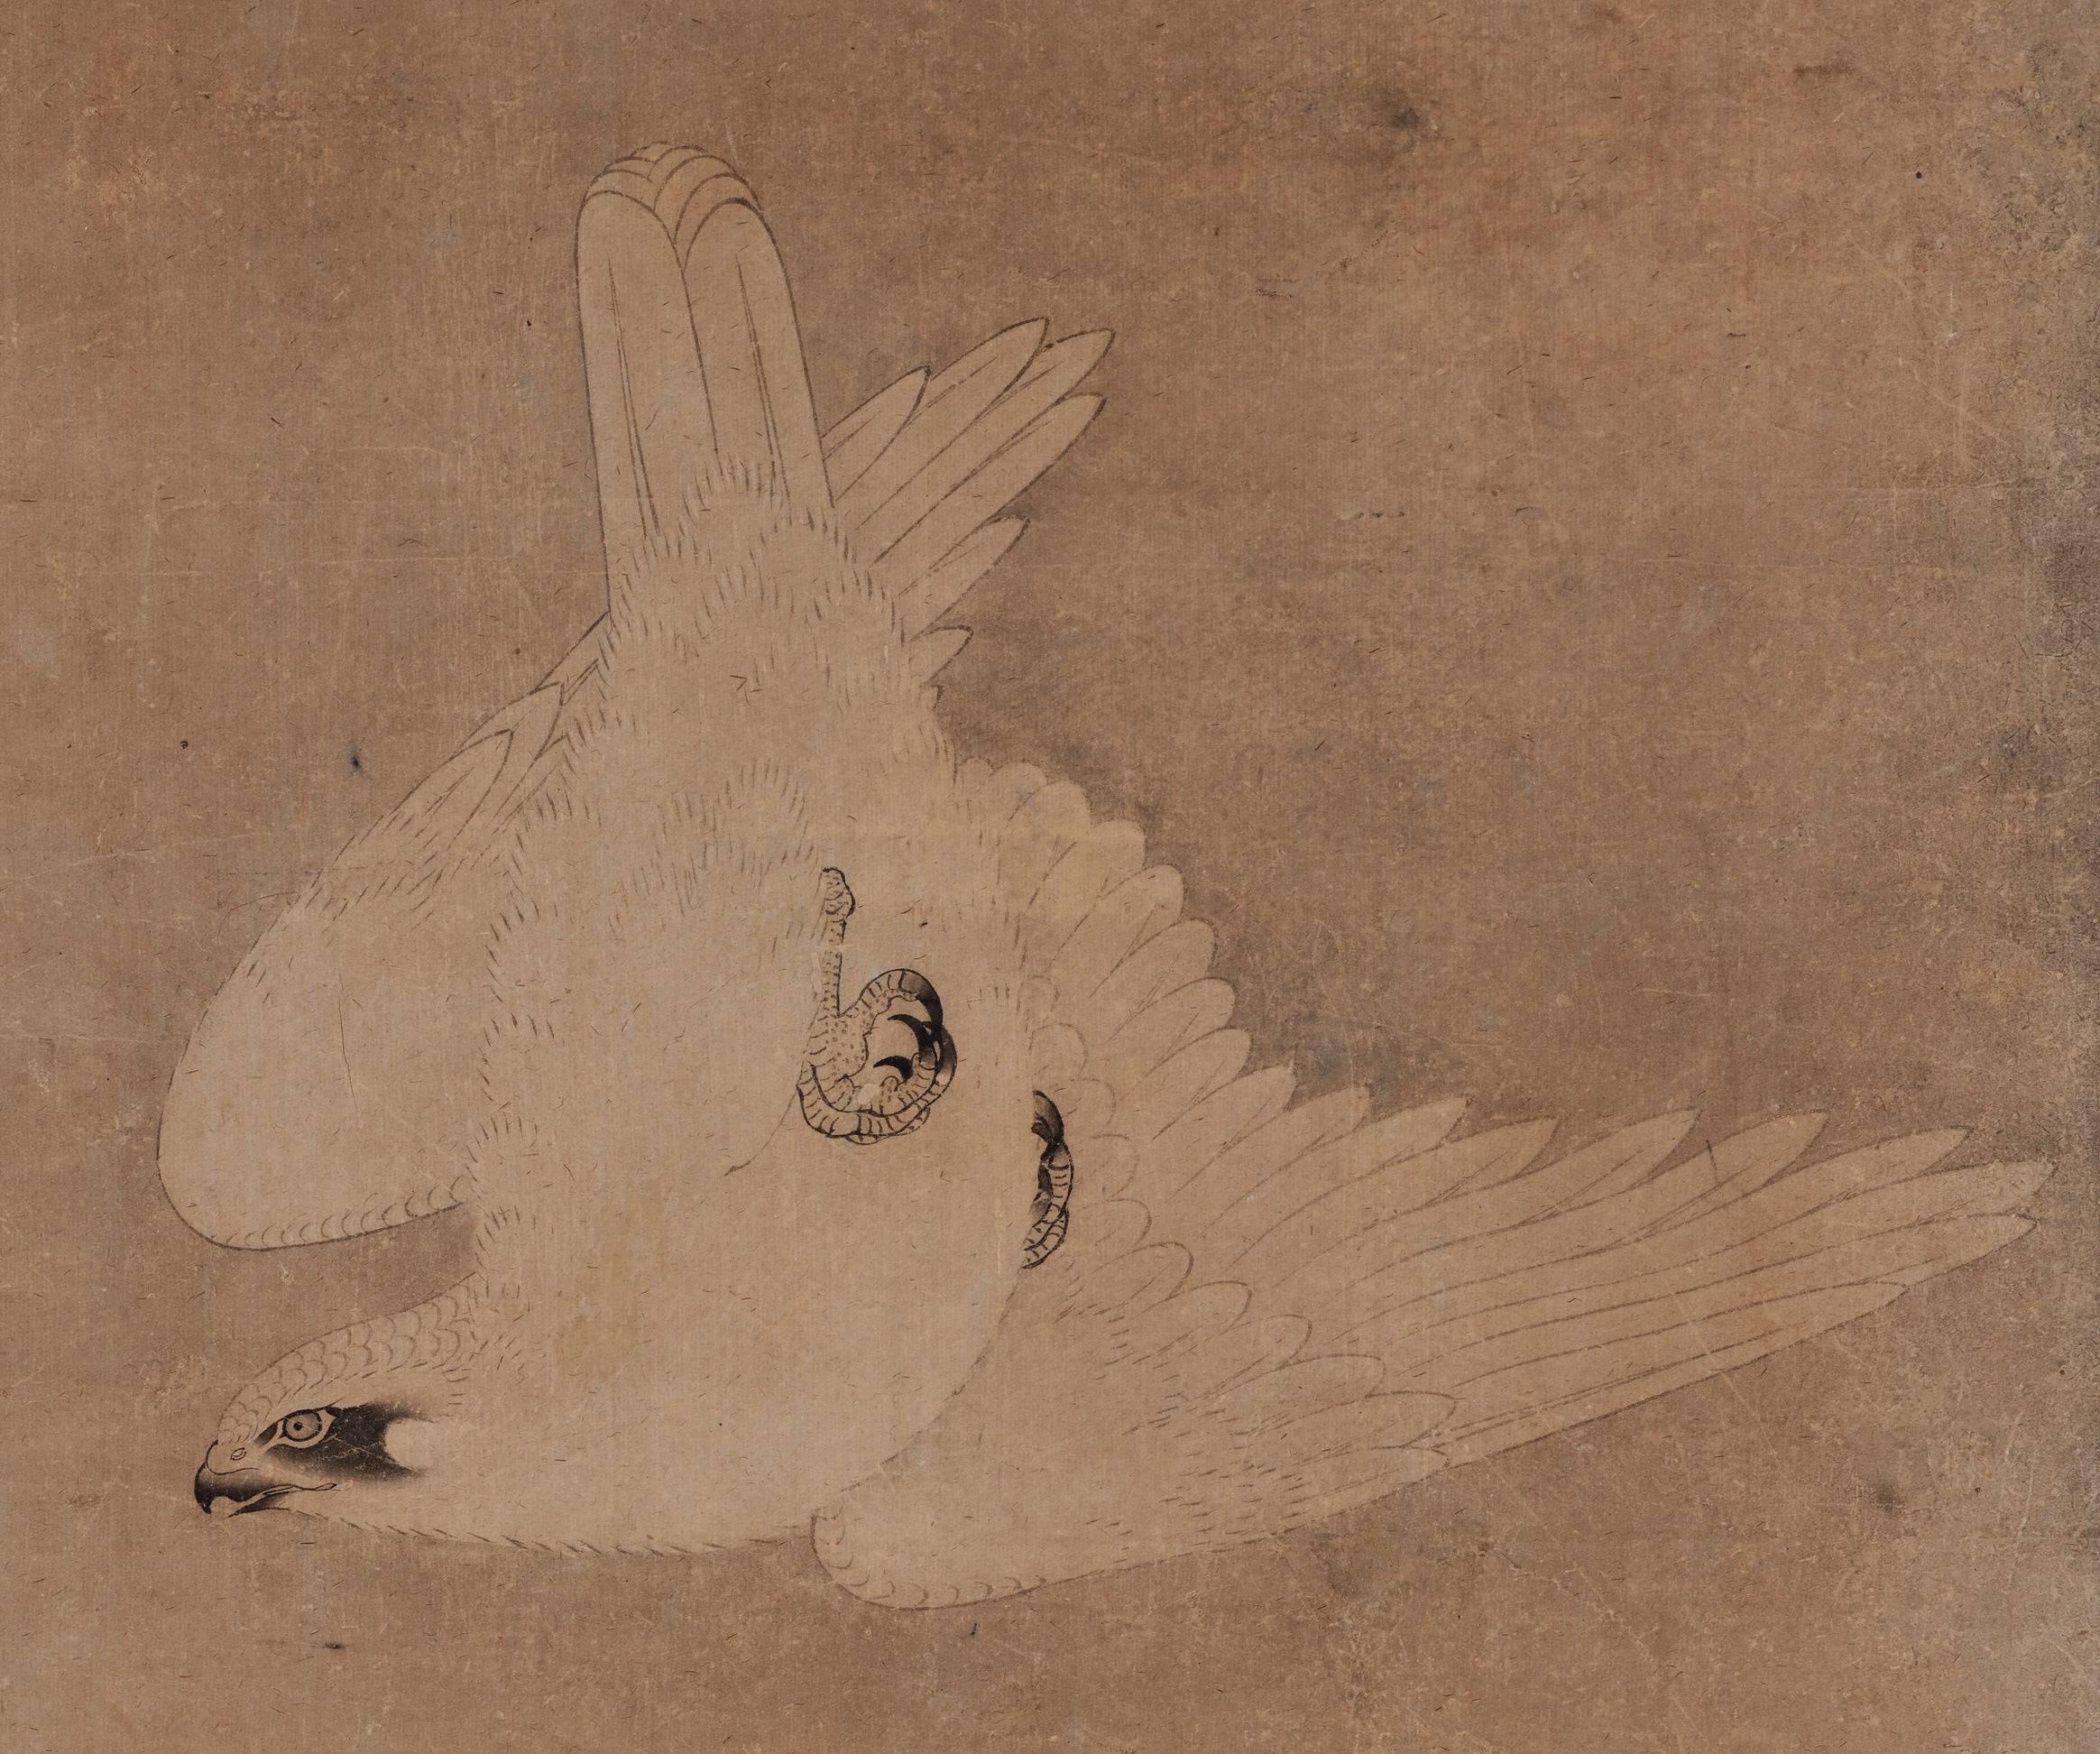 Mitani Toshuku (1577-1654)
“Falcon”
Wall panel, ink and light color on paper.
Upper seal: Mitani
Lower seal: Toshuku
Dimensions:
Each 118.5 cm x 51 cm x 2 cm (46.5” x 20” x .75”)

Individual falcon paintings by Mitani Toshuku (1577-1654), an